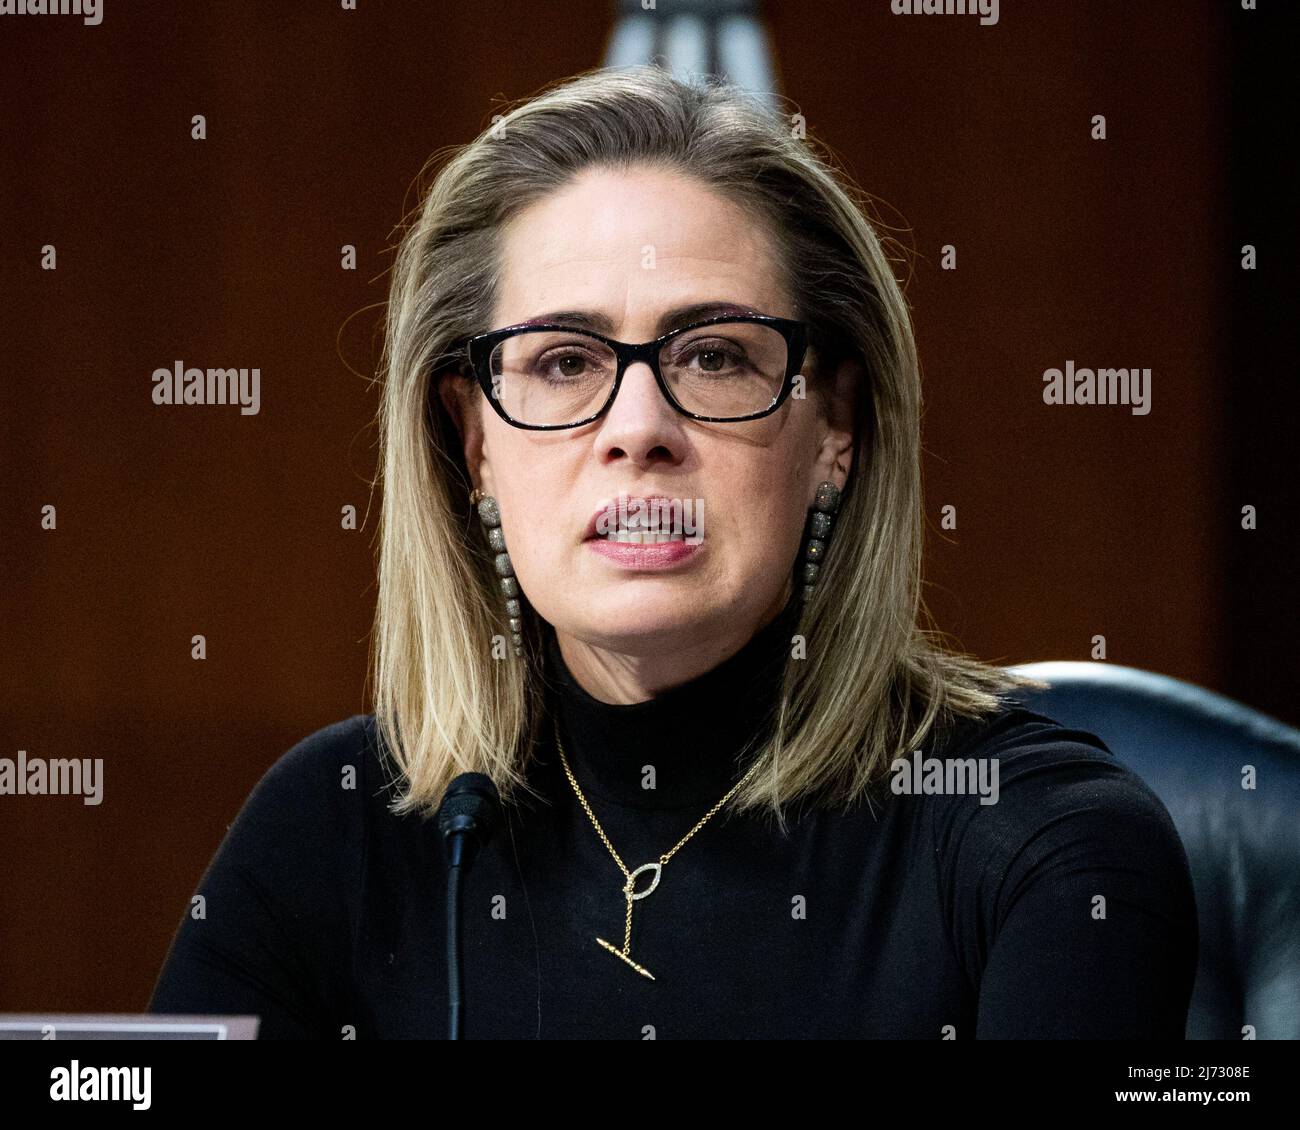 May 5, 2022, Washington, District of Columbia, United States: U.S. Senator KYRSTEN SINEMA (D-AZ) speaking at a hearing of the Senate Homeland Security and Governmental Affairs Committee. (Credit Image: © Michael Brochstein/ZUMA Press Wire) Stock Photo